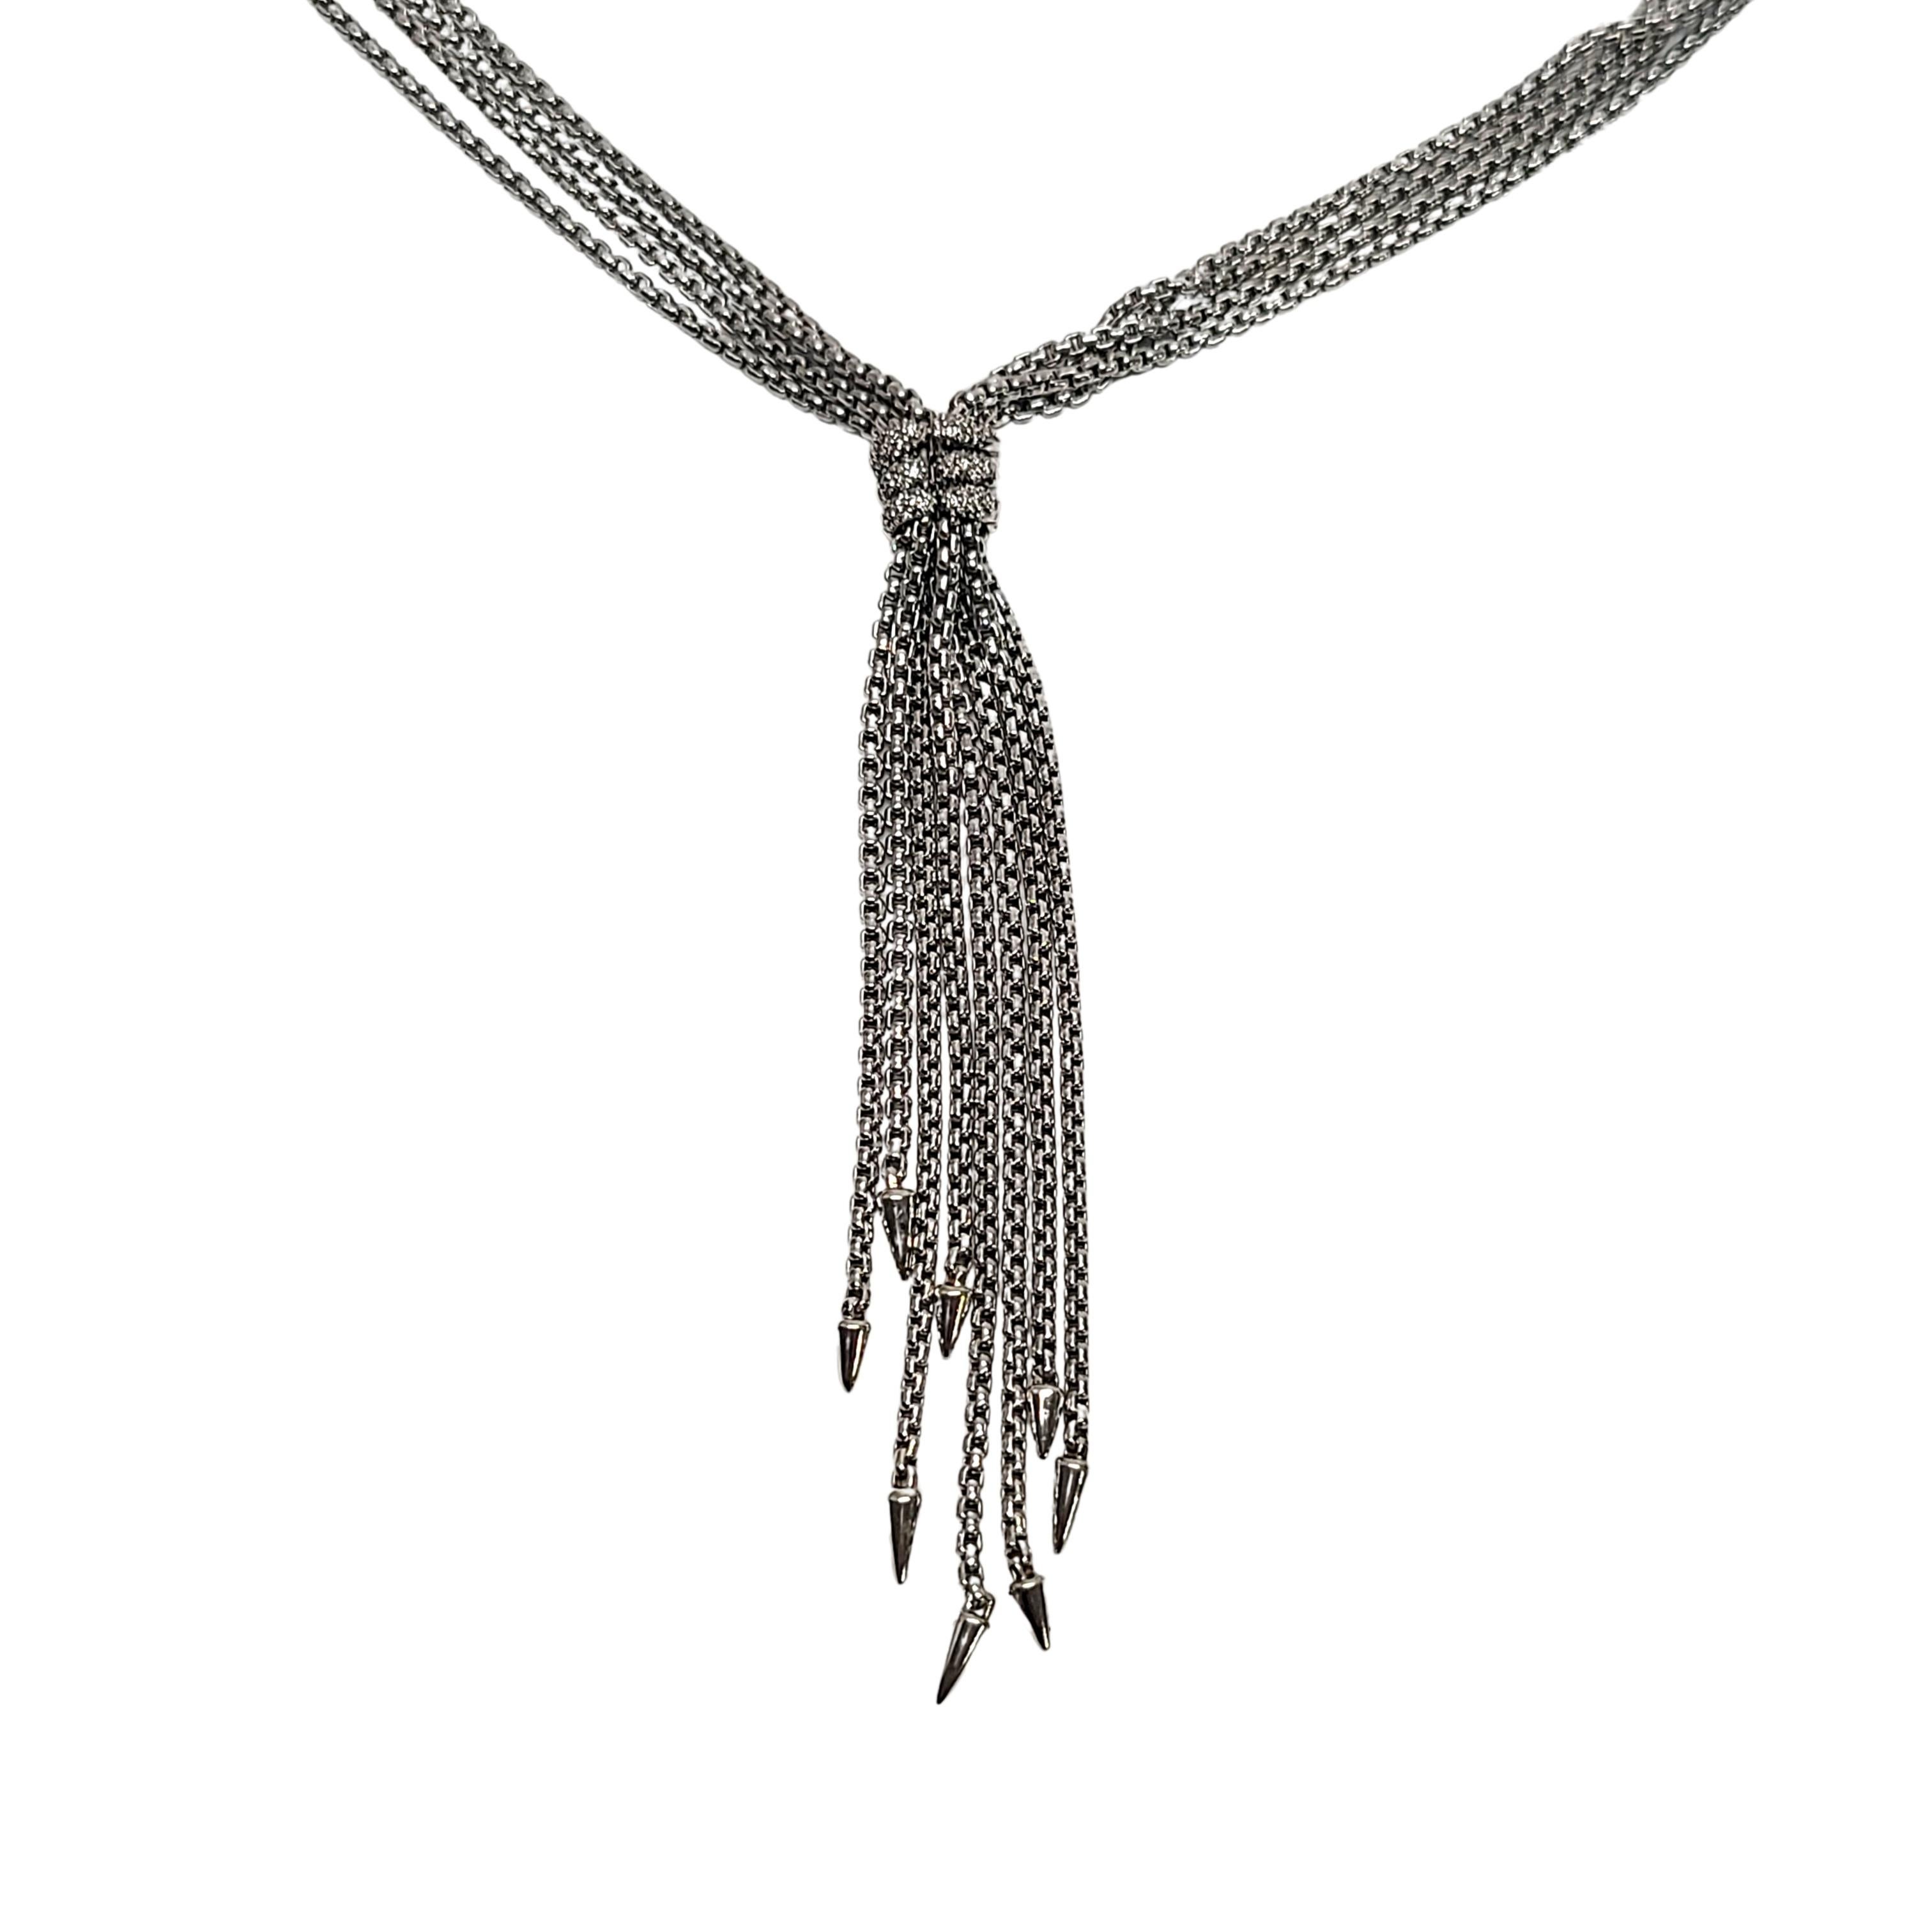 Sterling silver Diamond Willow Drop tassel necklace by David Yurman

This beautiful sterling silver and diamond necklace is by David Yurman, it features 4 strands of box chains, with a tassel design hanging from 3 rows of pave diamonds on one side,